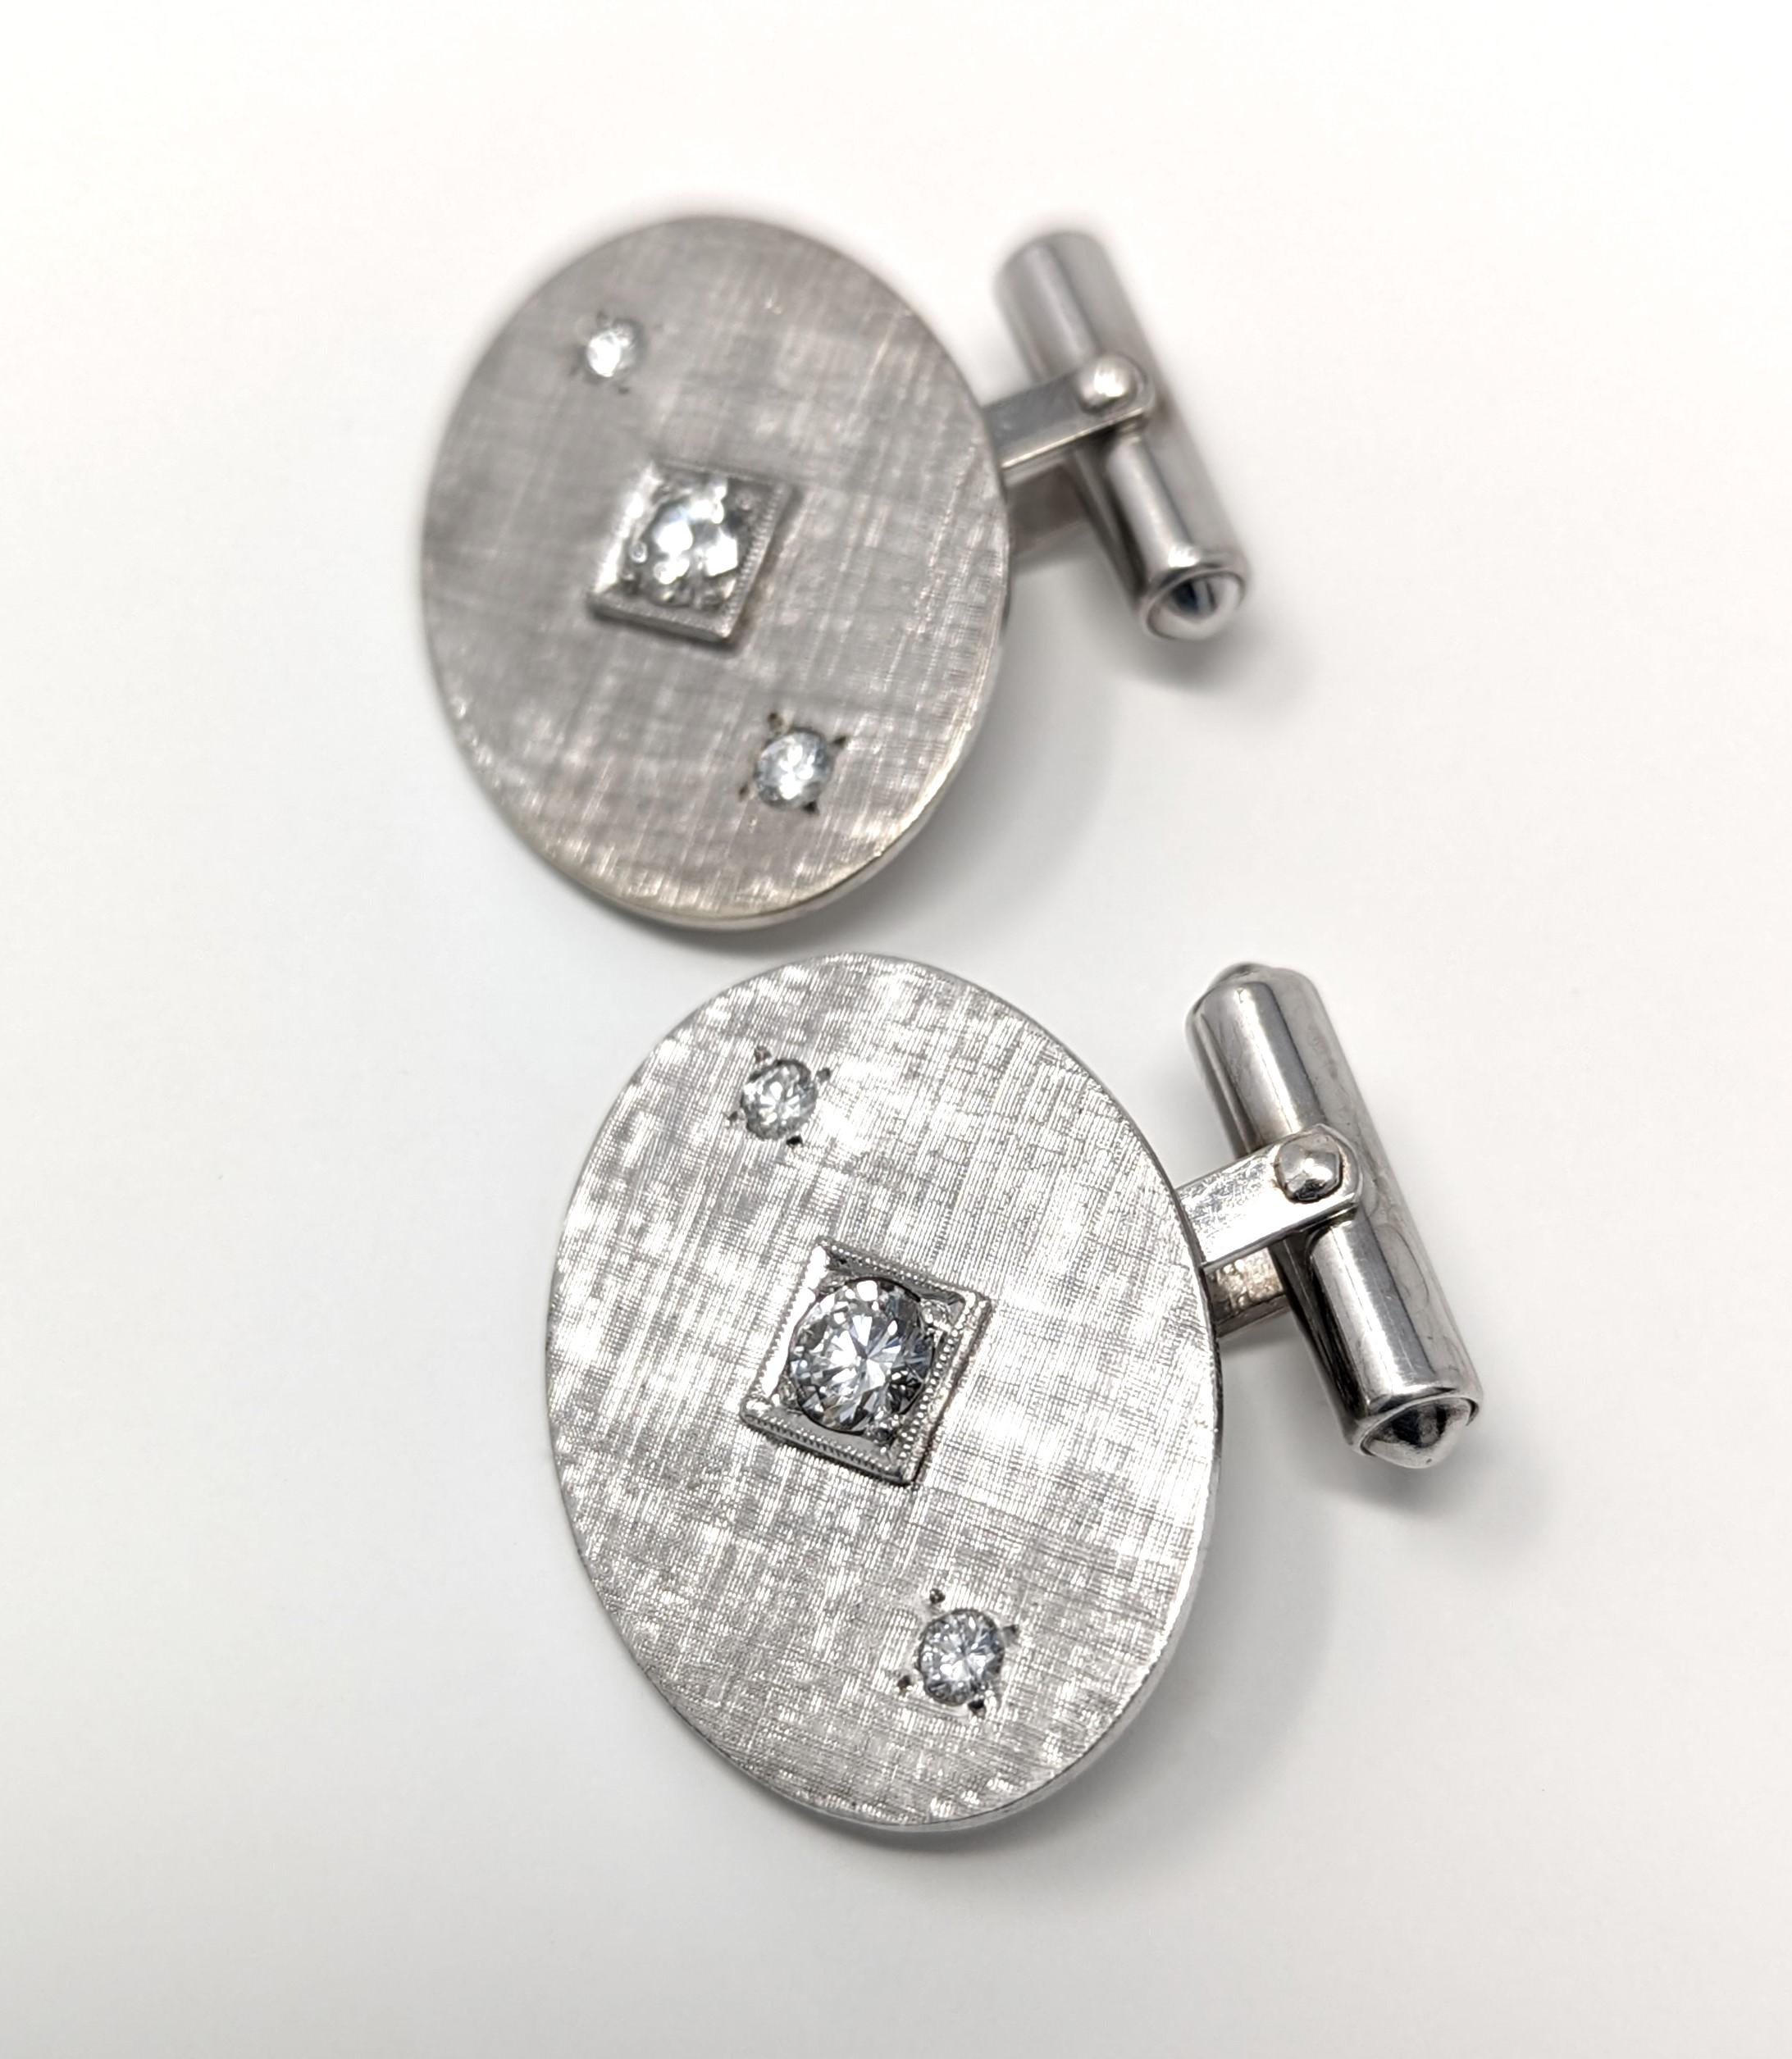 Elegant vintage 14k cufflinks with a modernist brushed gold design. Created in solid 14k white gold with bright and dazzling diamonds. Signed / stamped 14K PAT 2093723 PAT 2544833 on the interior of the cufflinks. The centerpiece measures .75 inch